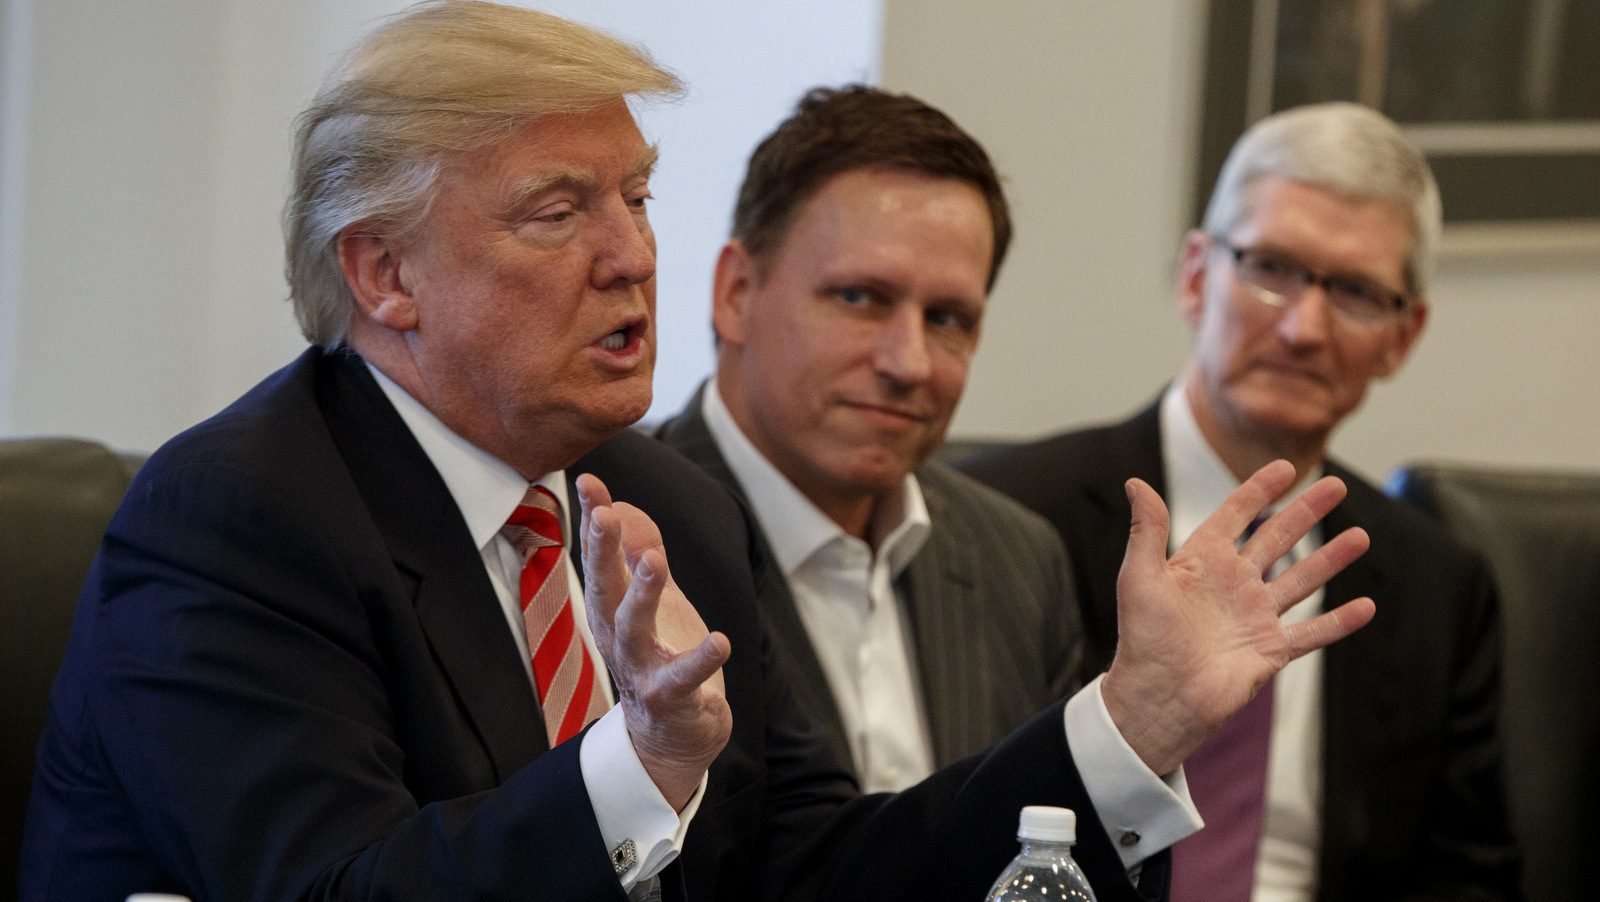 Palantir founder Peter Thiel, center, listens as President-elect Donald Trump speaks during a meeting with tech industry leaders at Trump Tower in New York, Apple CEO Tim Cook is pictured in the background. Dec. 14, 2016. (AP/Evan Vucci)